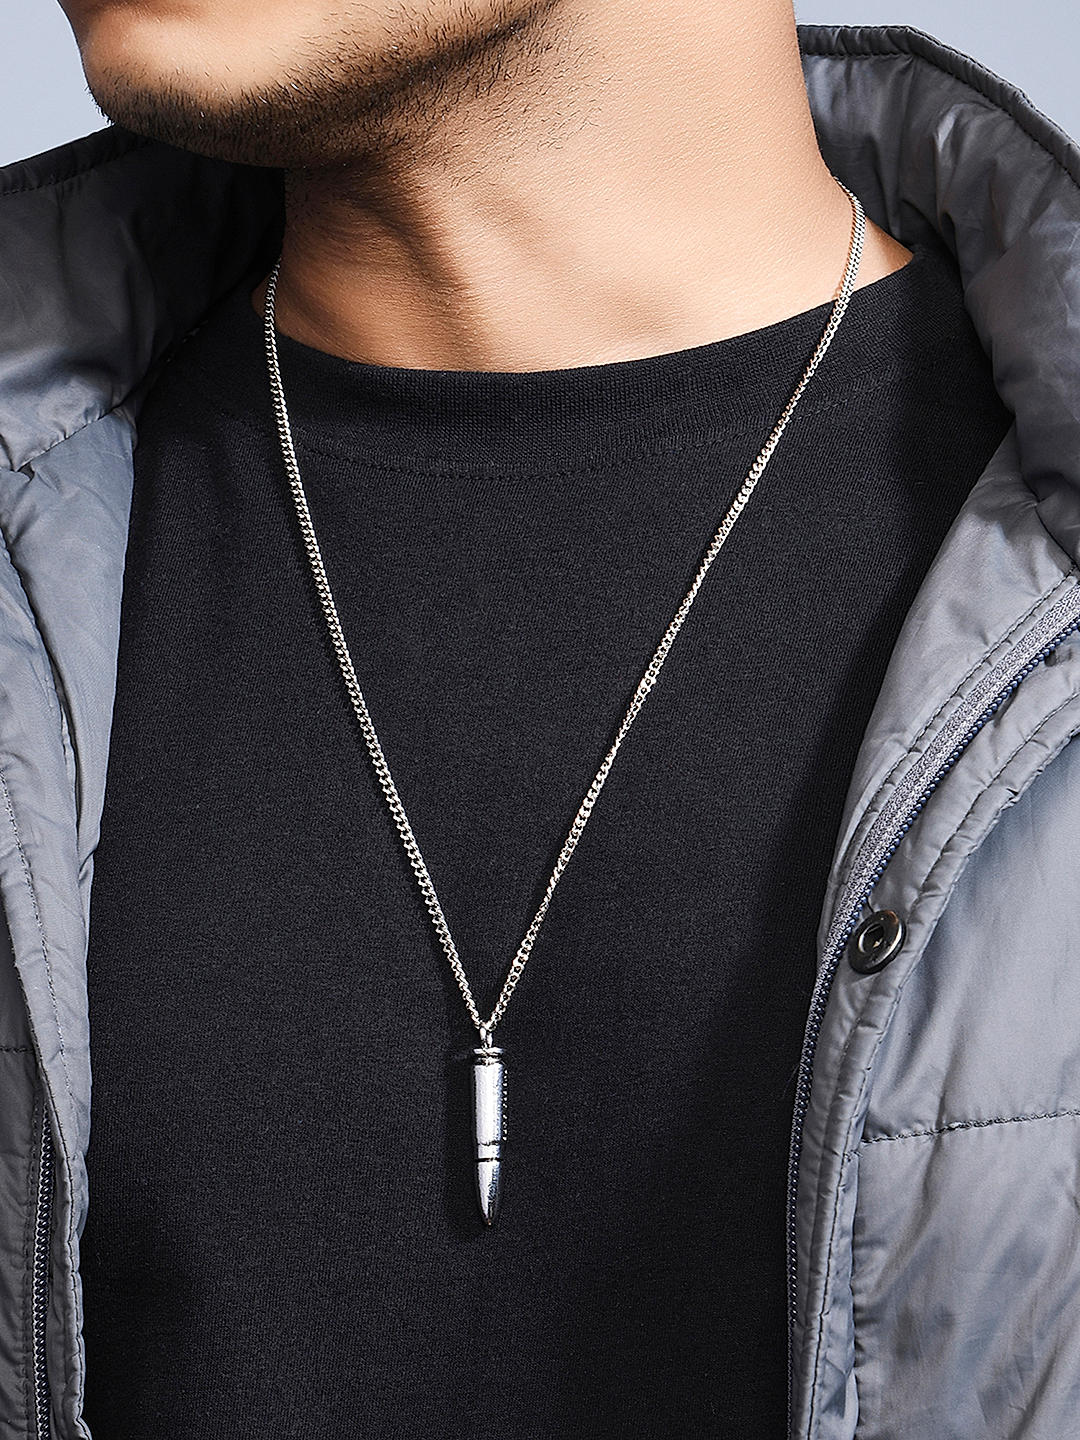 Engraved Stainless Steel Bullet Bullet Pendant For Men Cross Lord Bible  Prayer Jewelry For Cremation Ashes Urn Bijoux From Redjune, $8.38 |  DHgate.Com